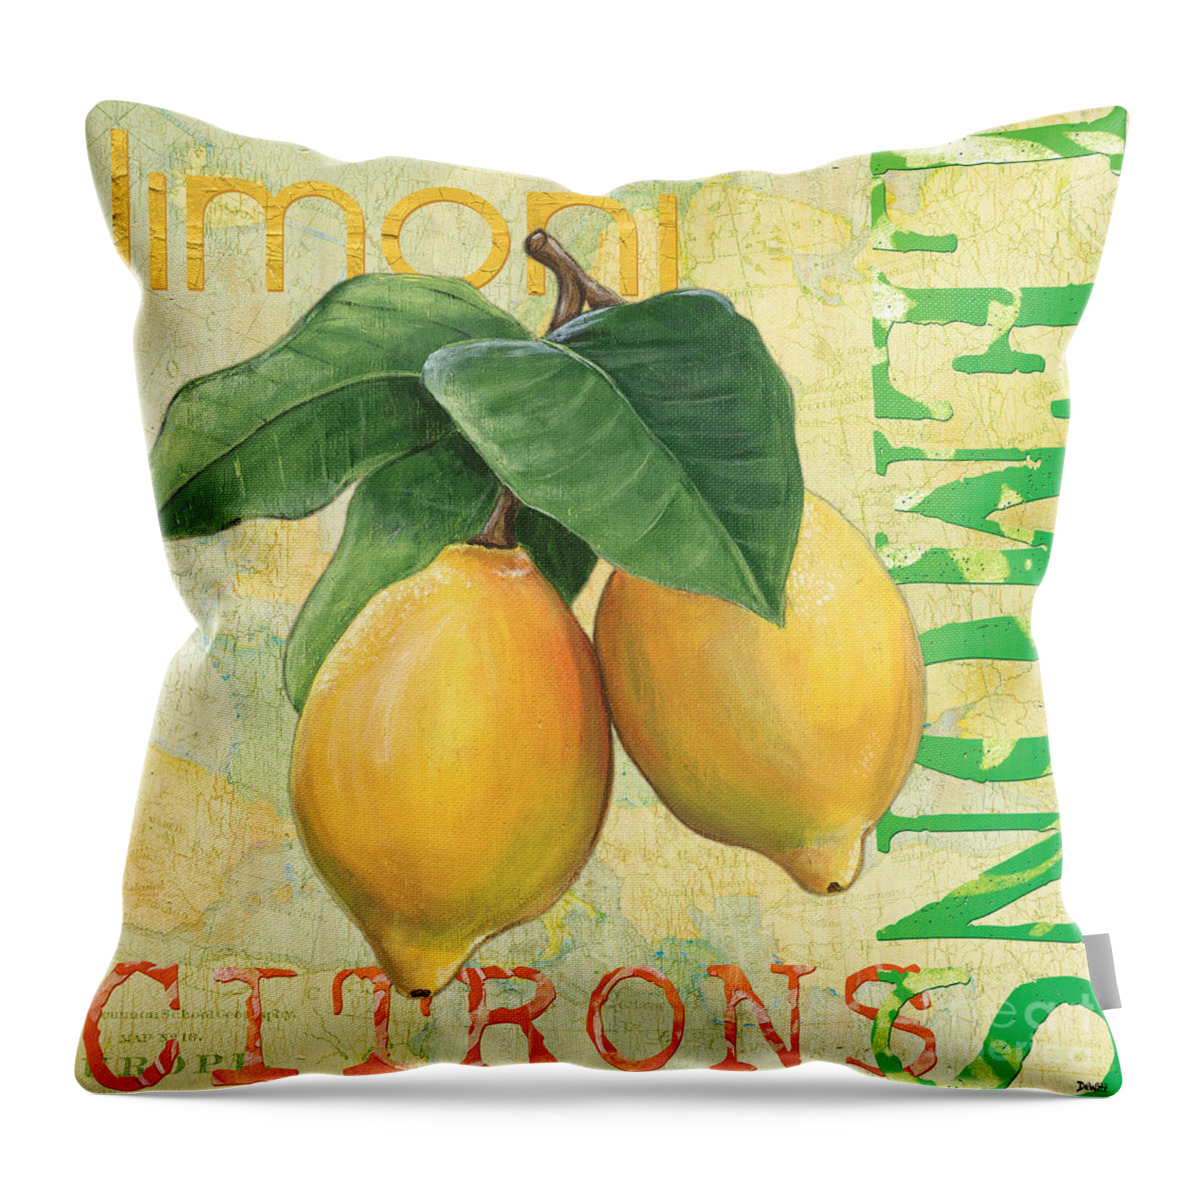 #faatoppicks Throw Pillow featuring the painting Froyo Lemon by Debbie DeWitt